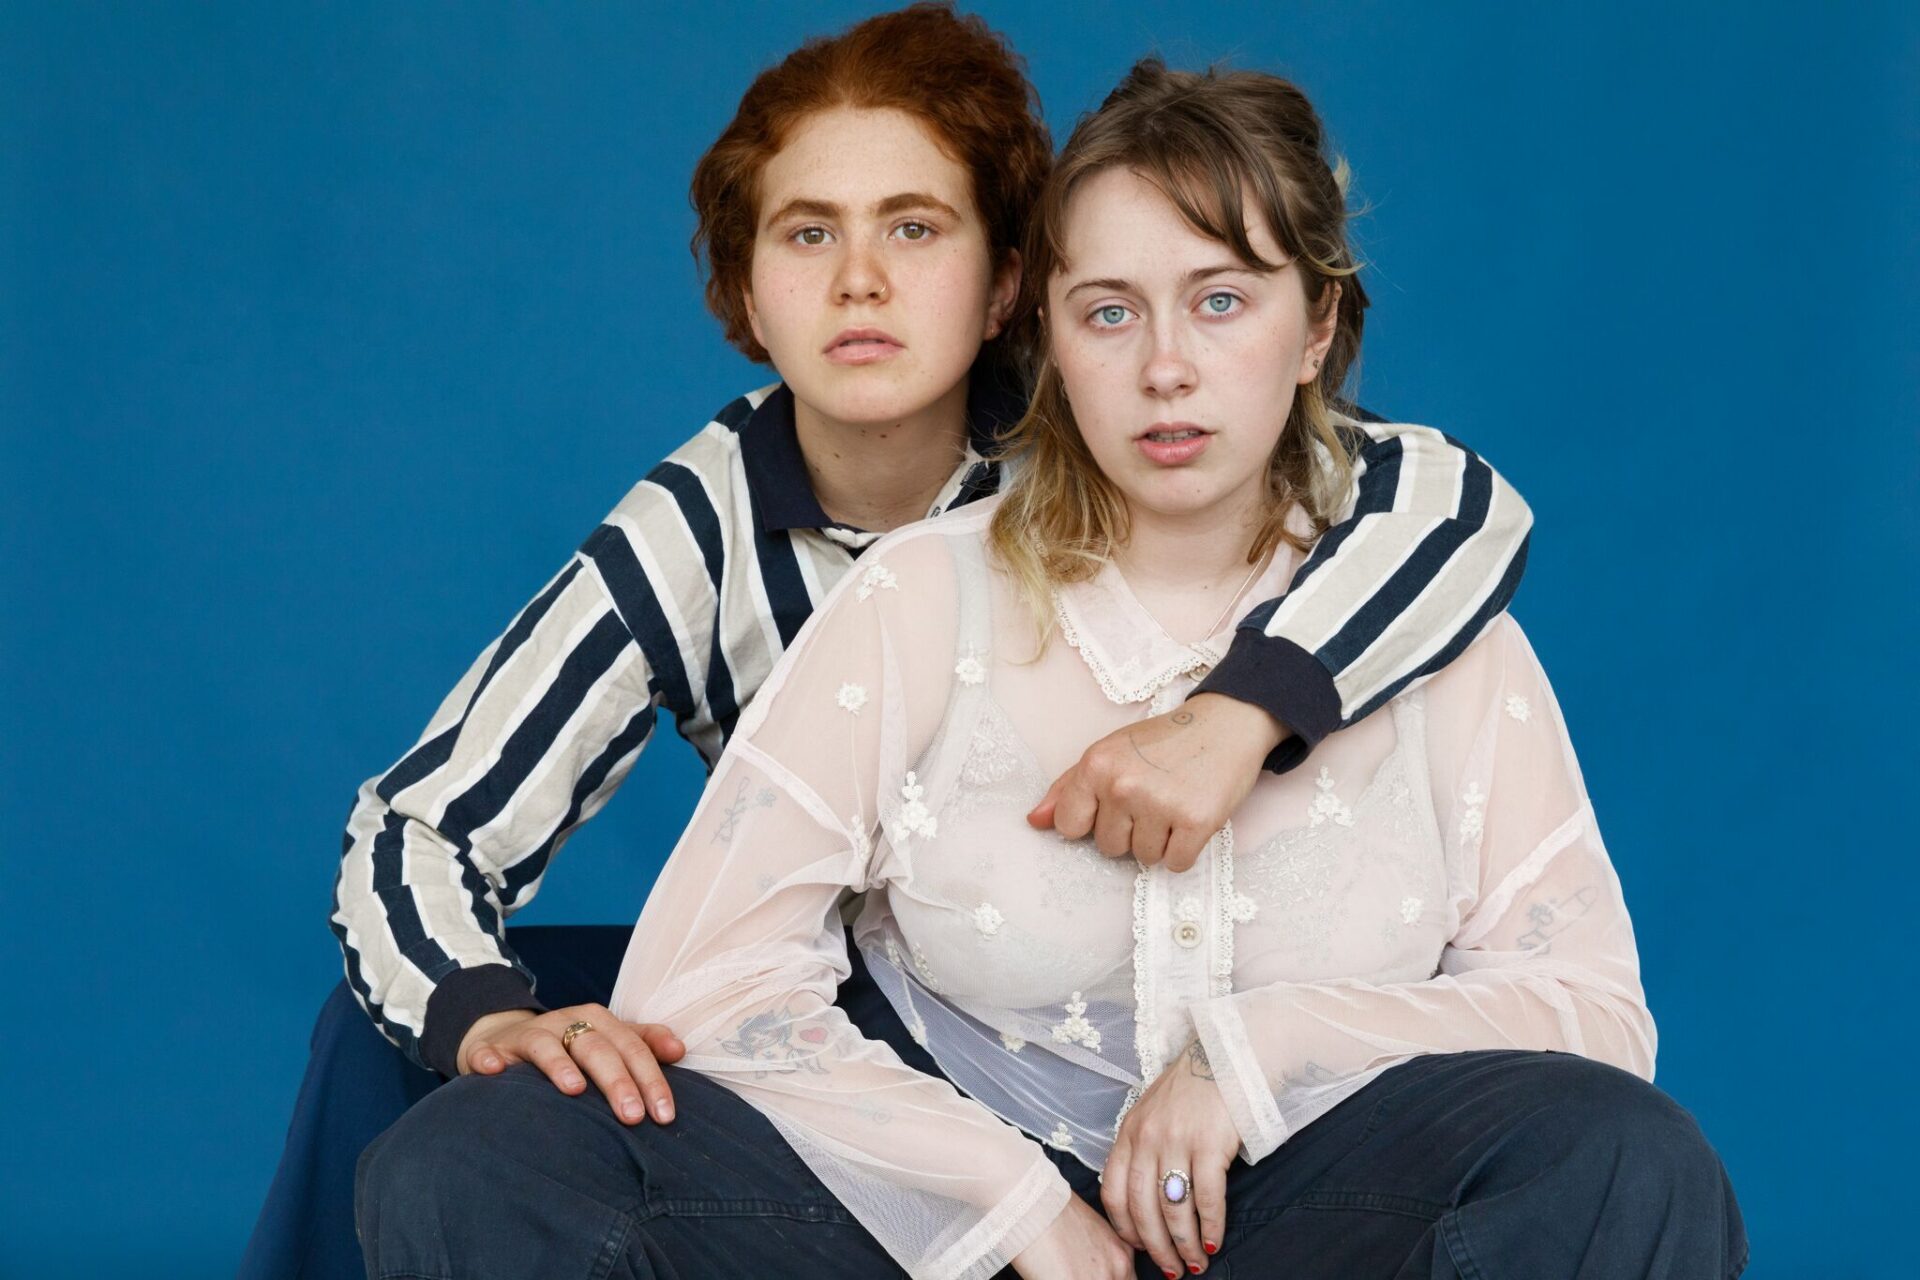 Girlpool are going on a US tour with Palm this fall